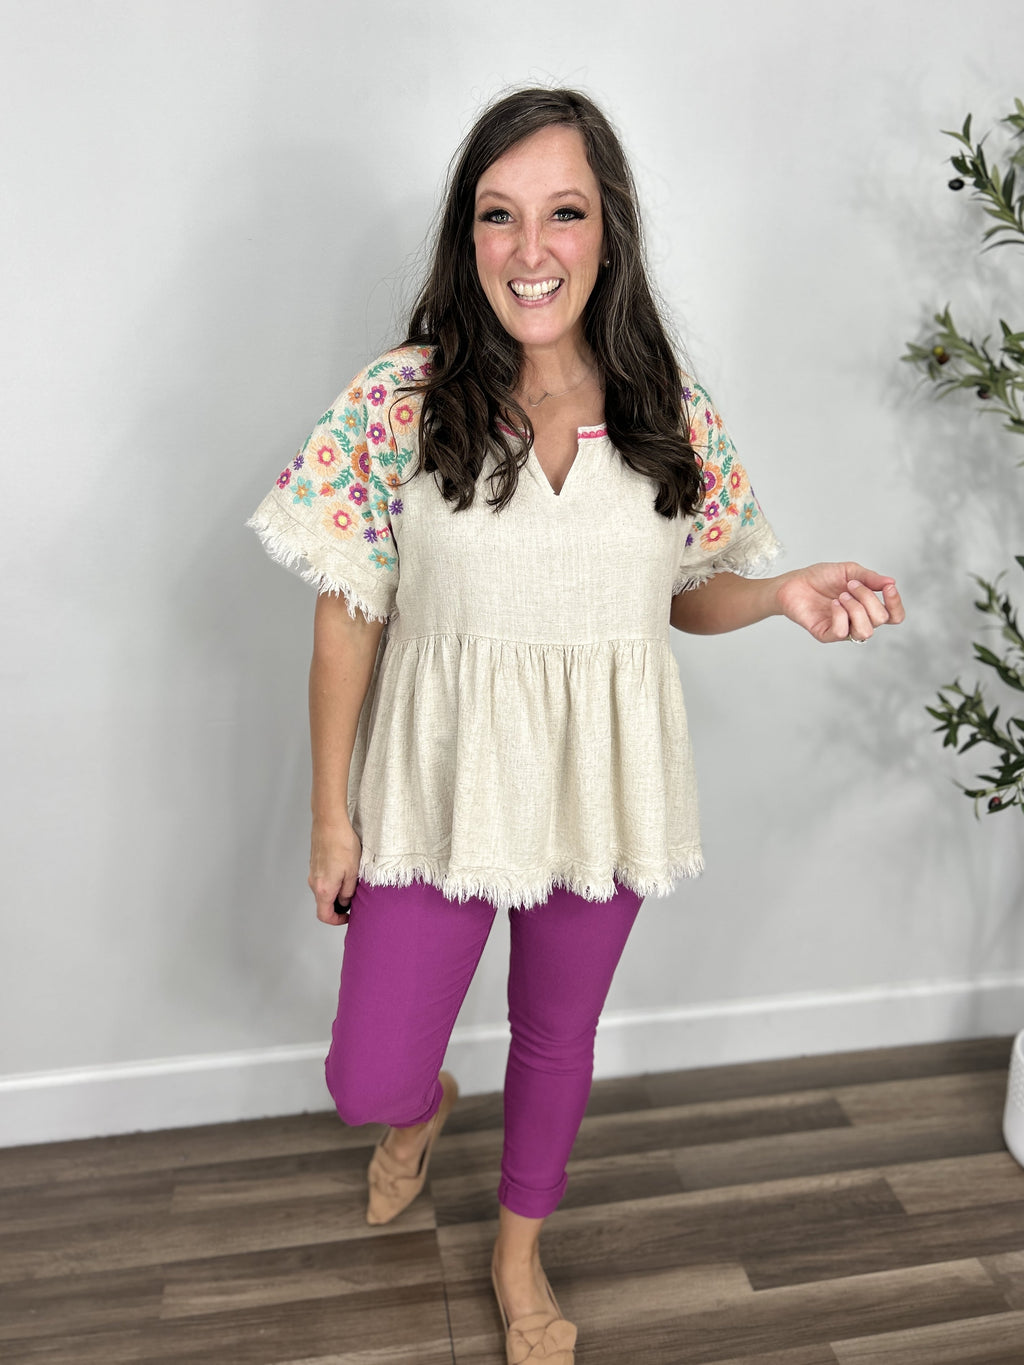 Laura embroiled floral sleeve babydoll top paired with fuchsia skinny jeans and flat camel color shoes.